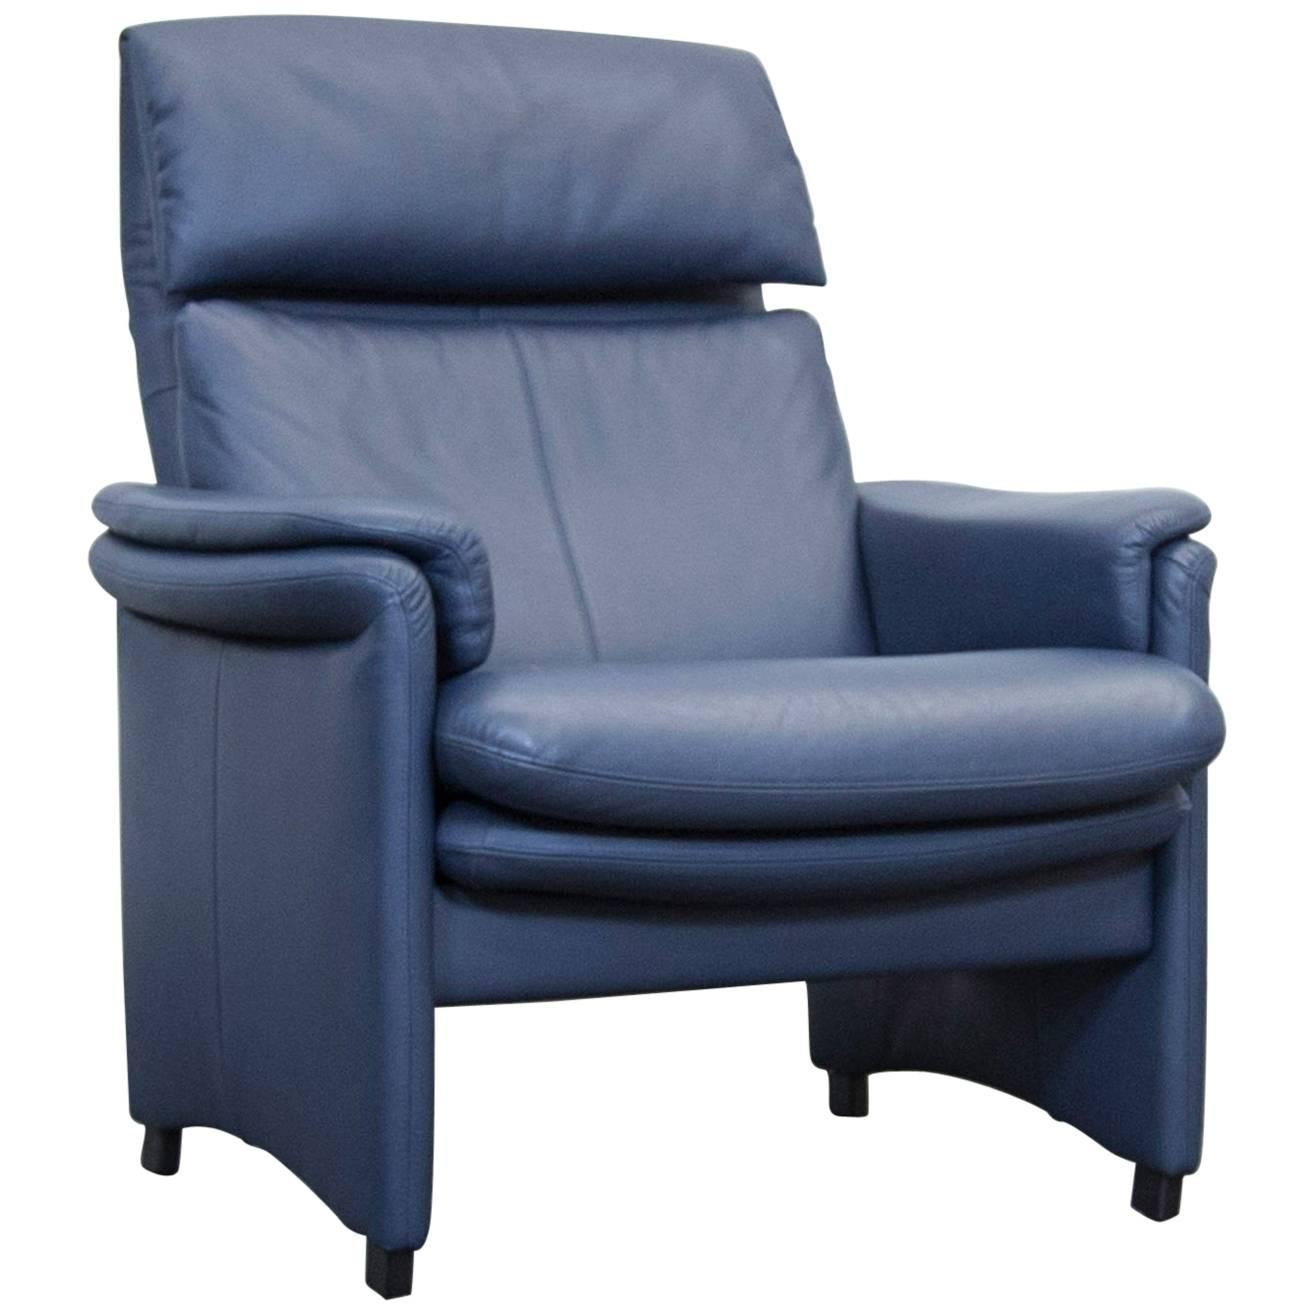 Erpo Designer Leather Relax Chair Blue Function One-Seat Modern